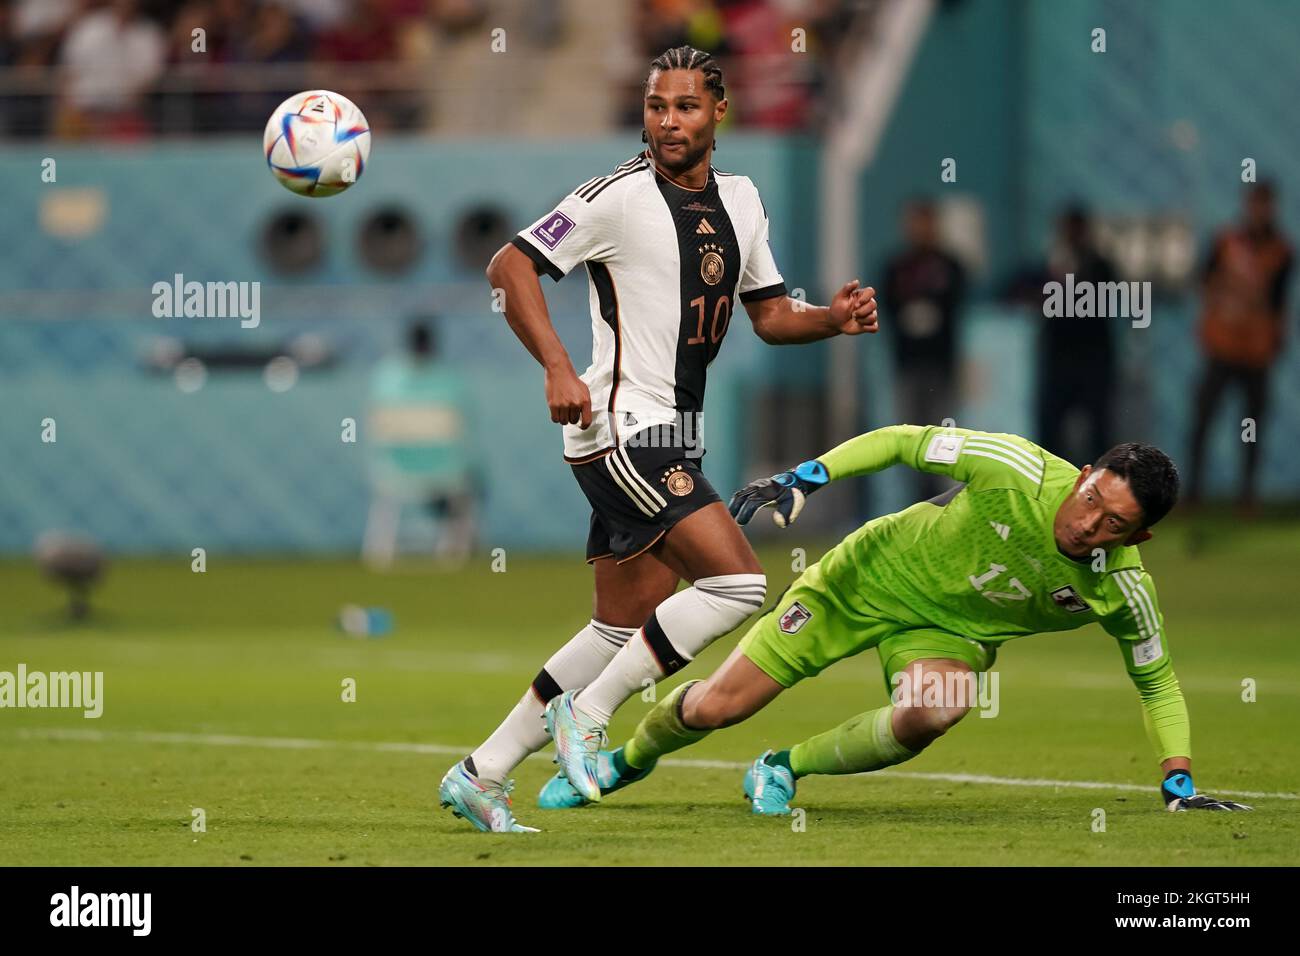 Doha, Qatar. 23rd Nov, 2022. DOHA, QATAR - NOVEMBER 23: Player of Japan Shuichi Gonda saves the ball whilst under pressure from Serge Gnabry of Germany during the FIFA World Cup Qatar 2022 group E match between Germany and Japan at Khalifa International Stadium on November 23, 2022 in Doha, Qatar. (Photo by Florencia Tan Jun/PxImages) Credit: Px Images/Alamy Live News Stock Photo